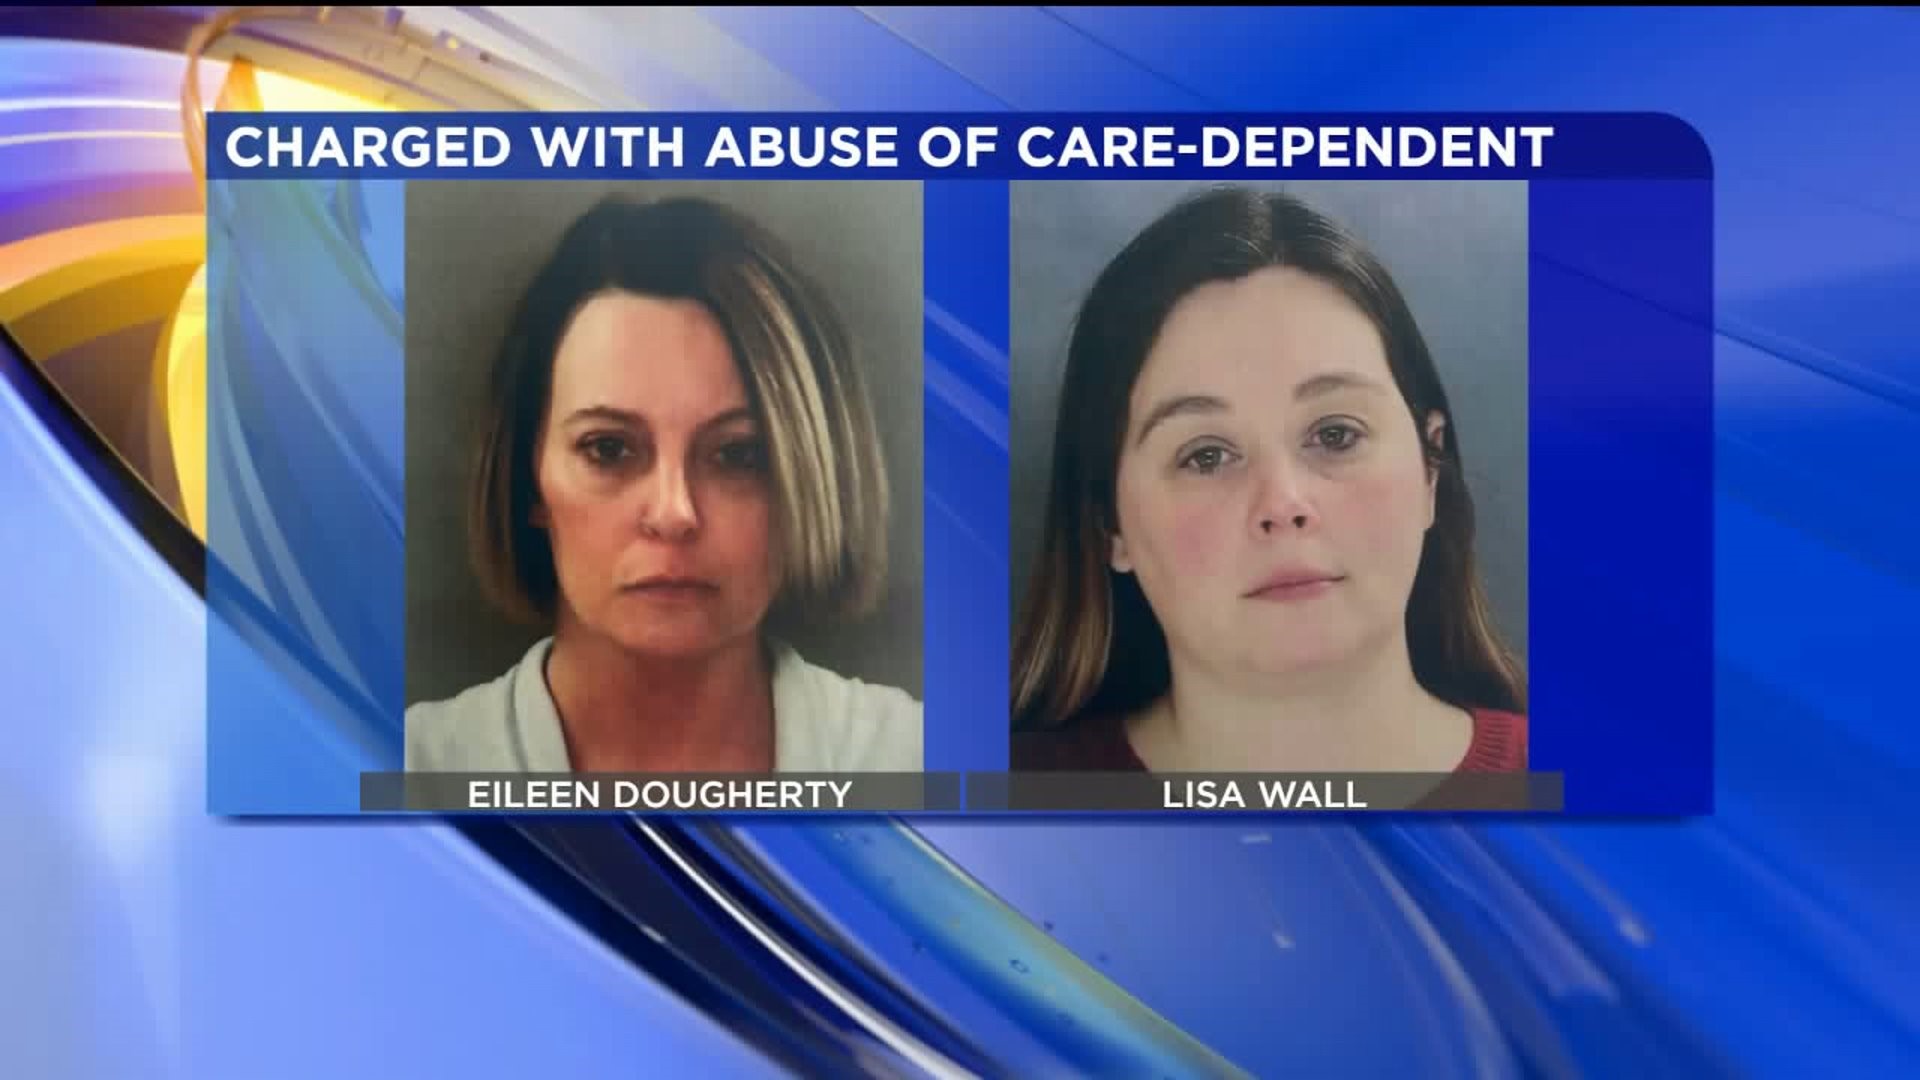 Two Charged with Abuse of Care-dependent Persons